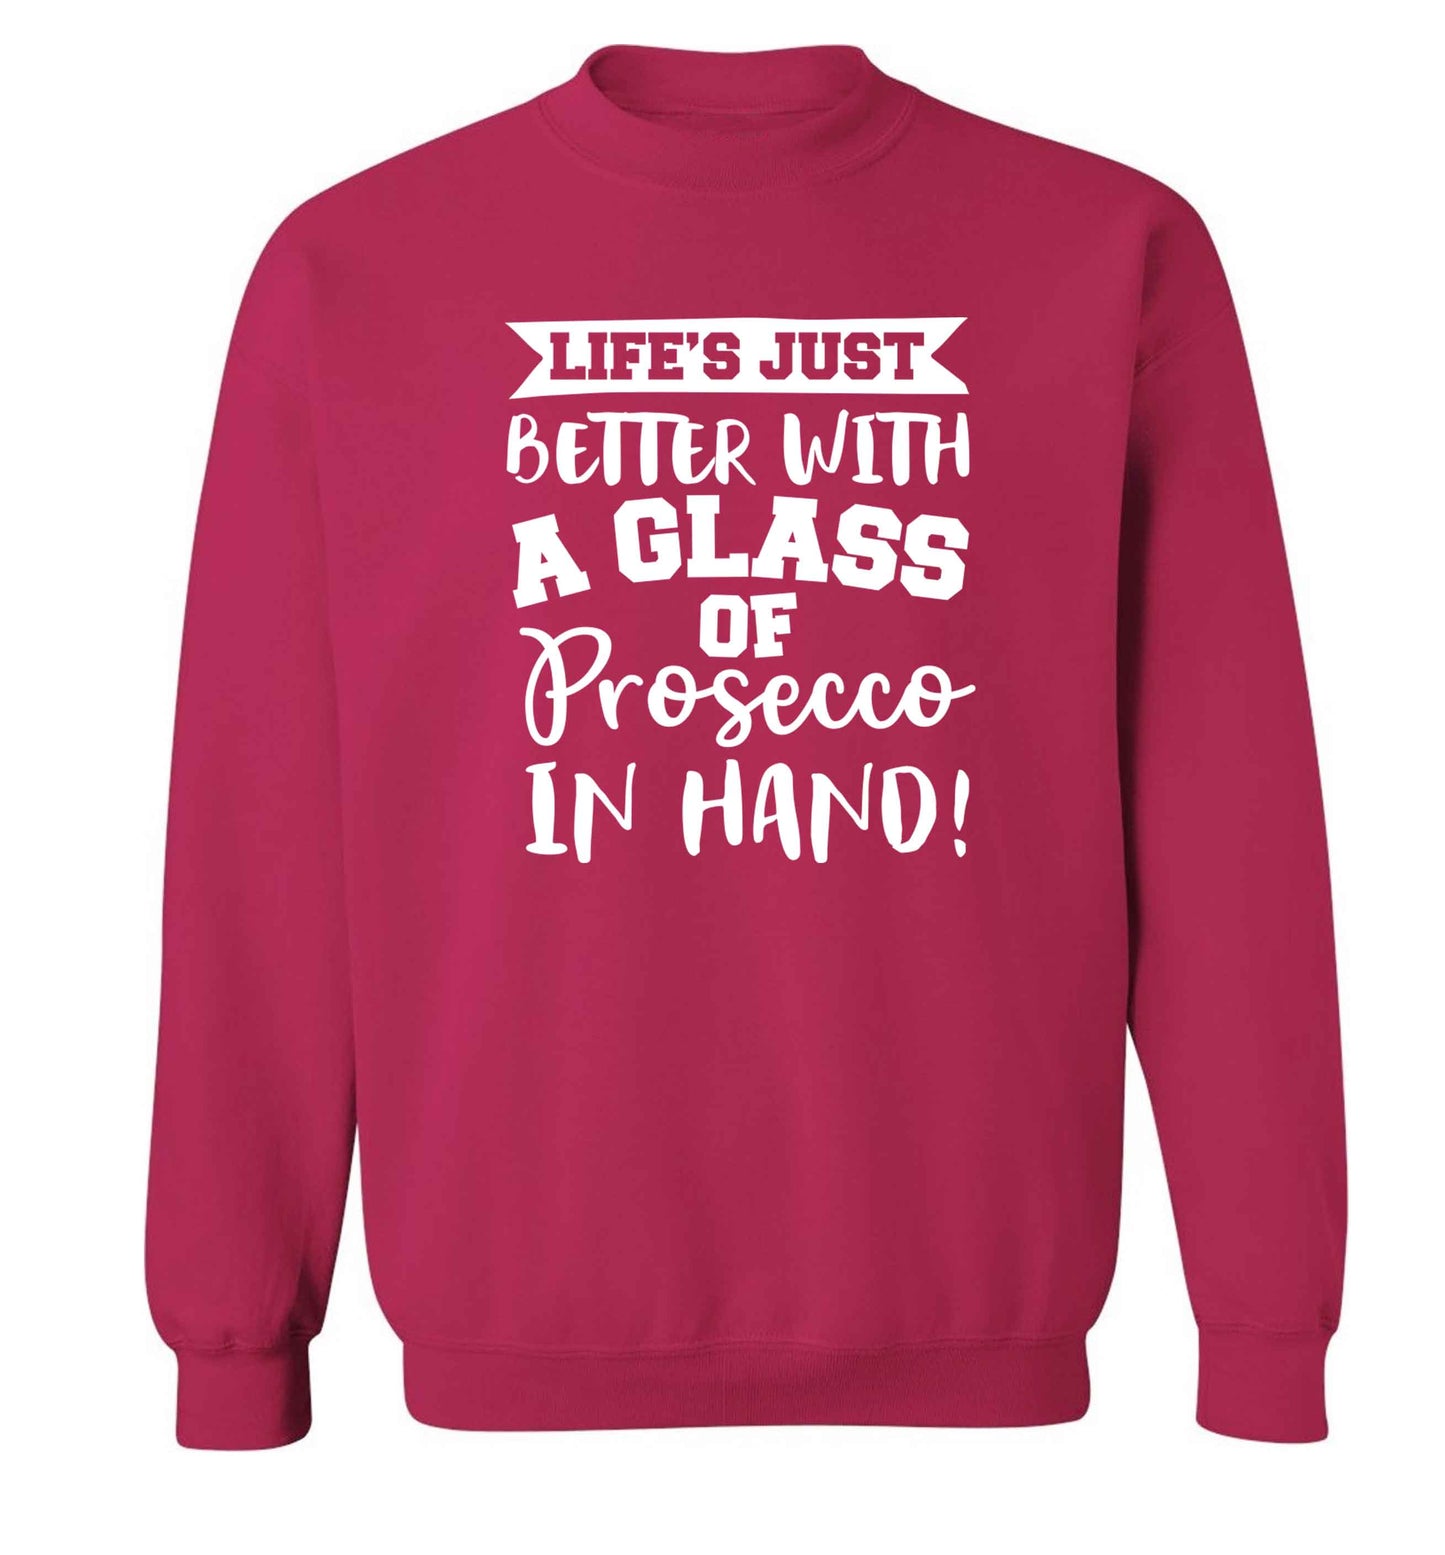 Life's just better with a glass of prosecco in hand Adult's unisex pink Sweater 2XL